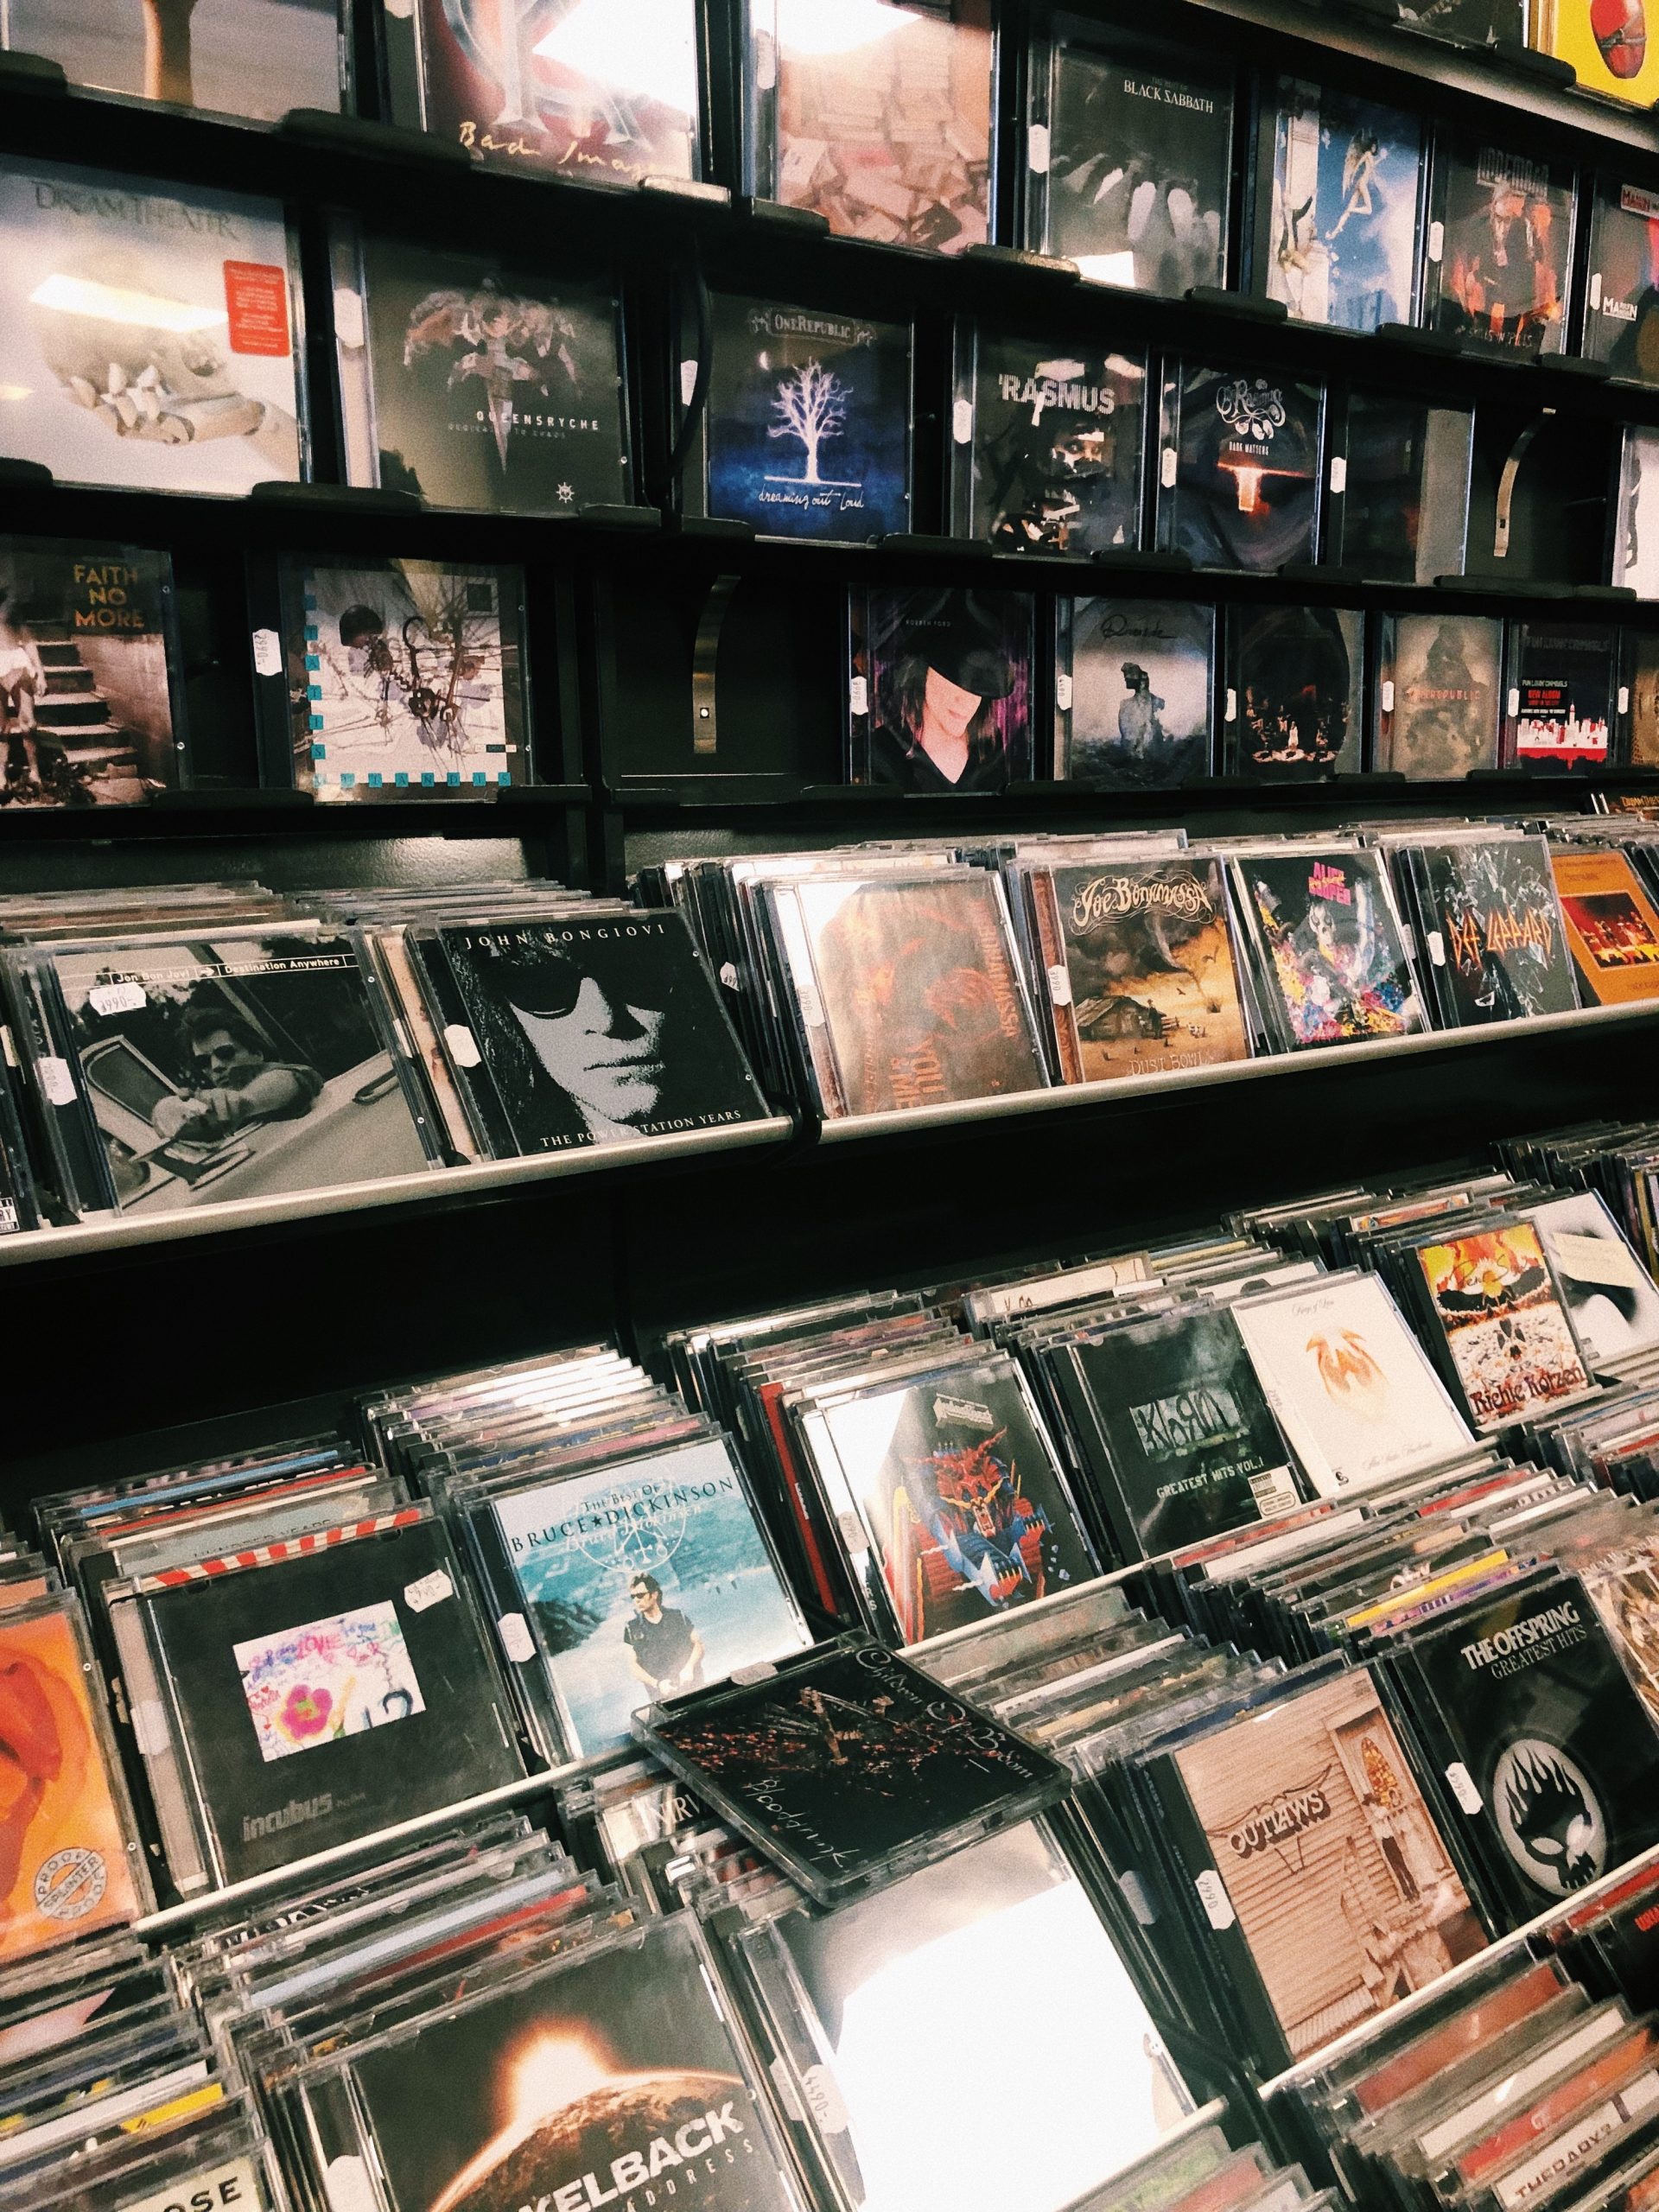 They just worked': reports of CDs' demise inspires wave of support, Music